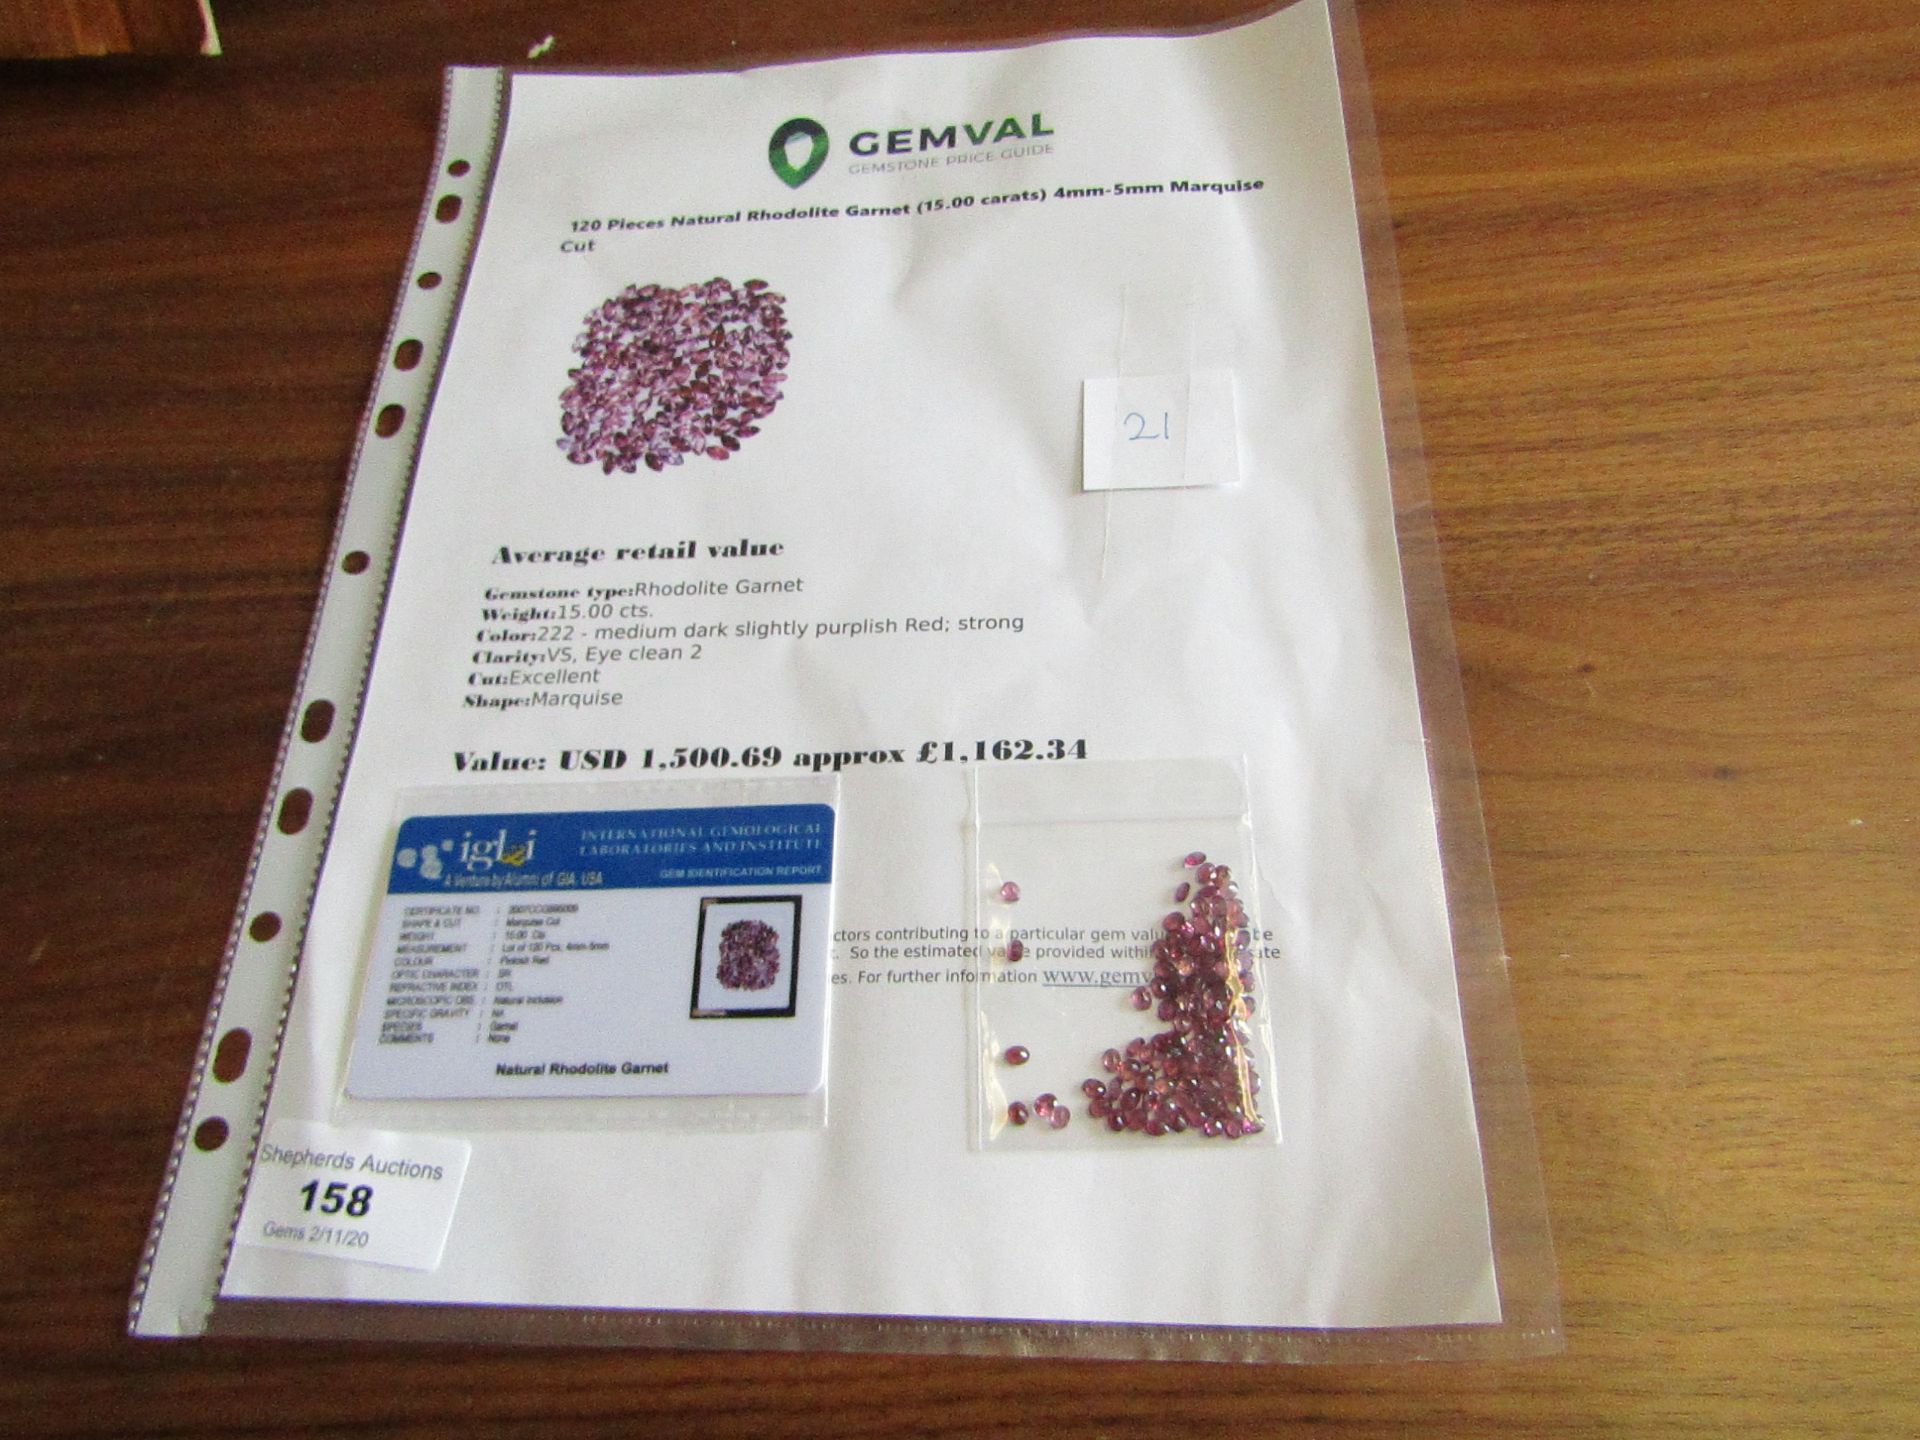 Natural Rhodalite Garnets - 15.00 carats - 120 pieces - average retail value £ 1,162.34 - Image 2 of 2